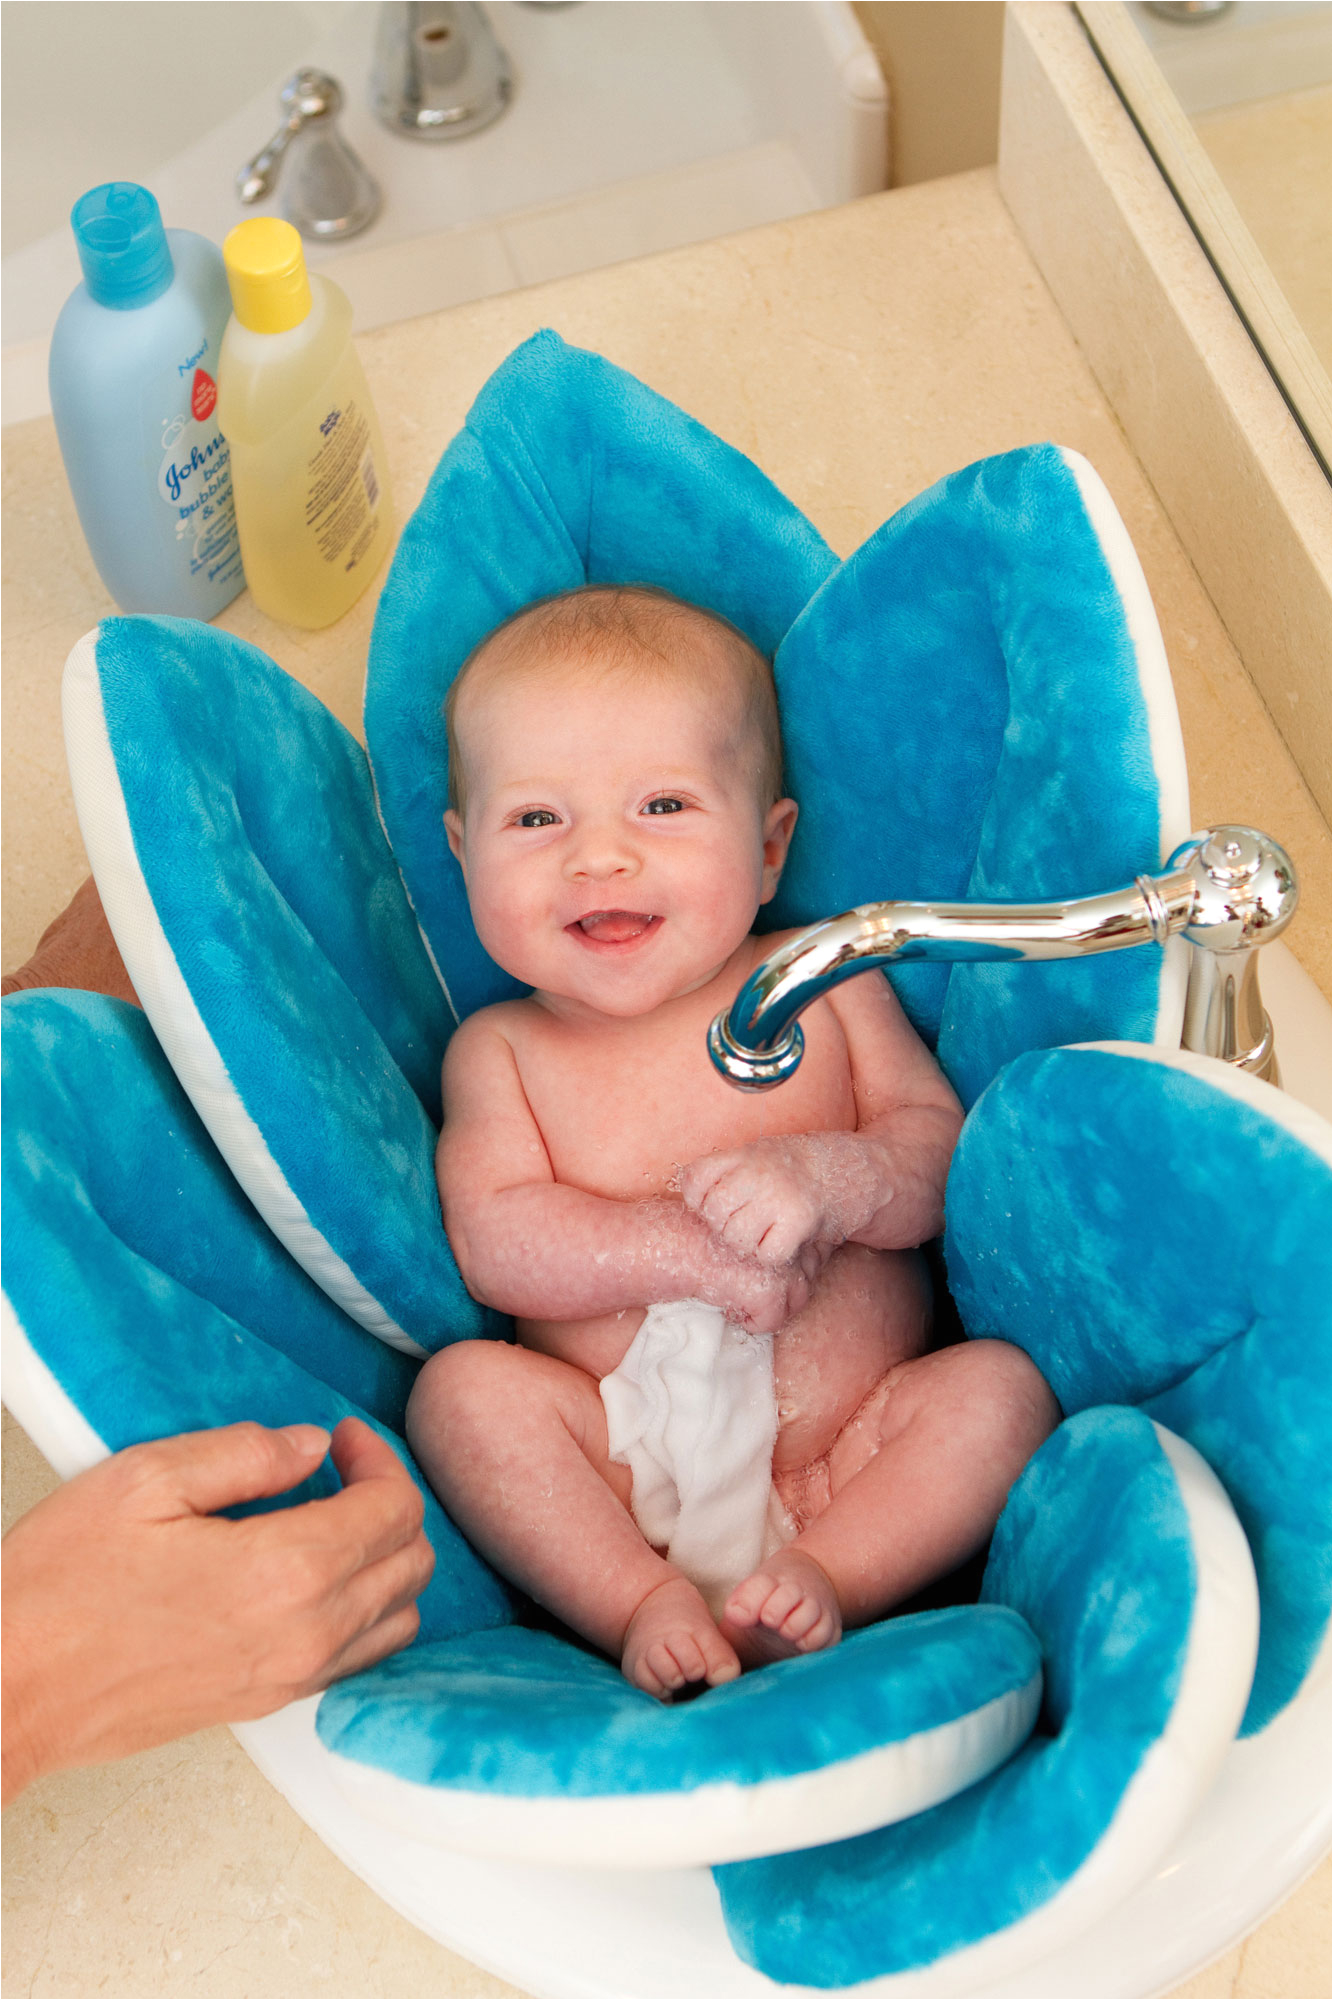 Baby Bathtub Review Diary Of A Fit Mommy Blooming Bath Review Giveaway